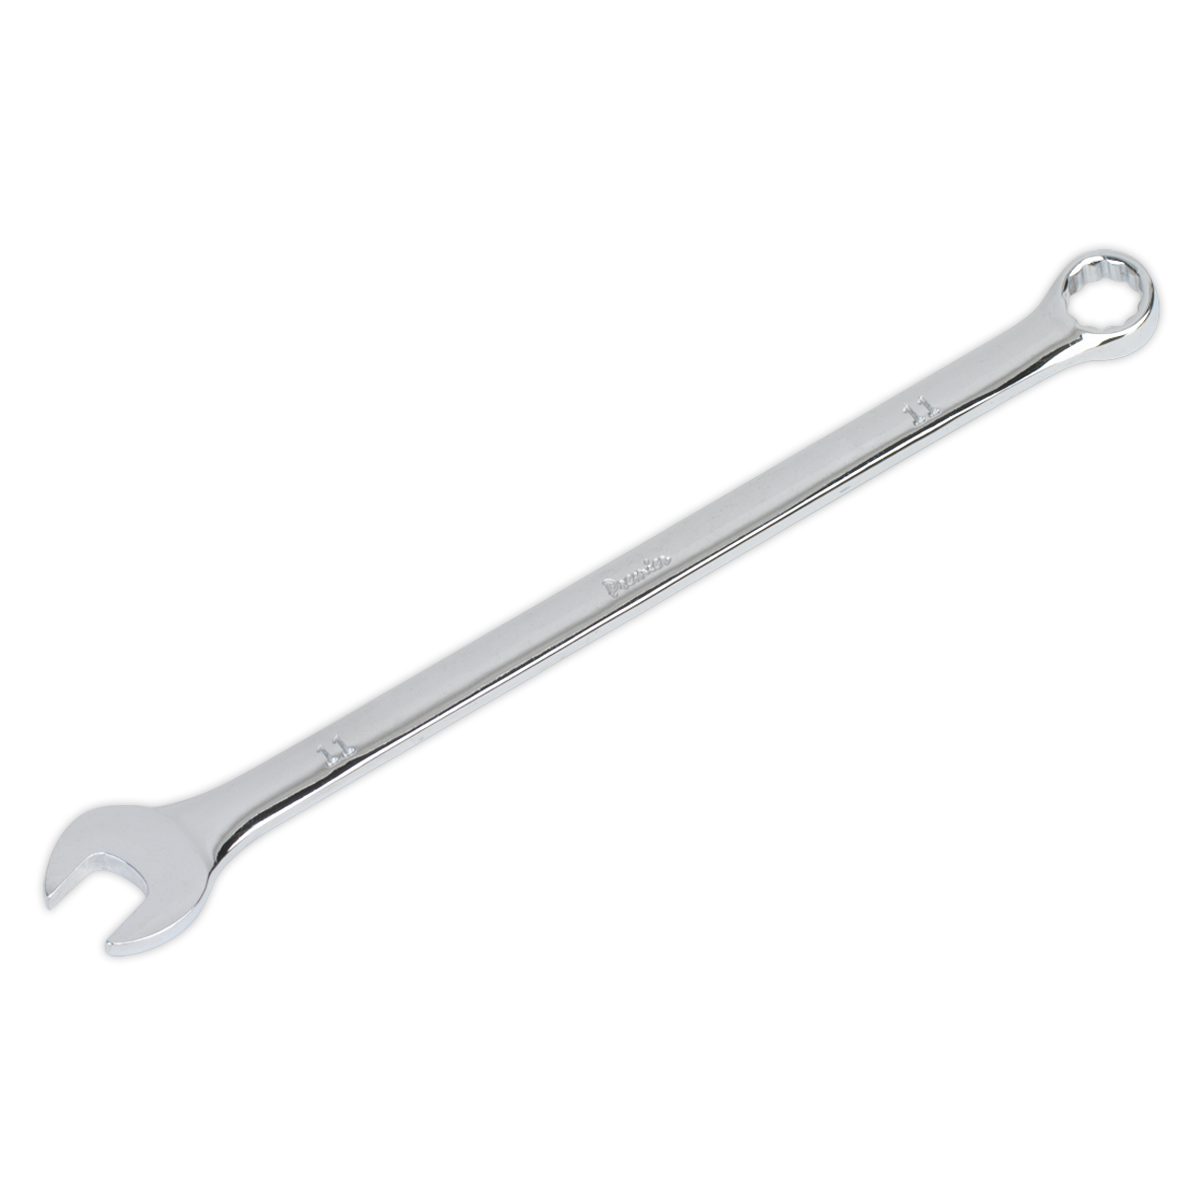 SEALEY - AK631011 Combination Spanner Extra-Long 11mm